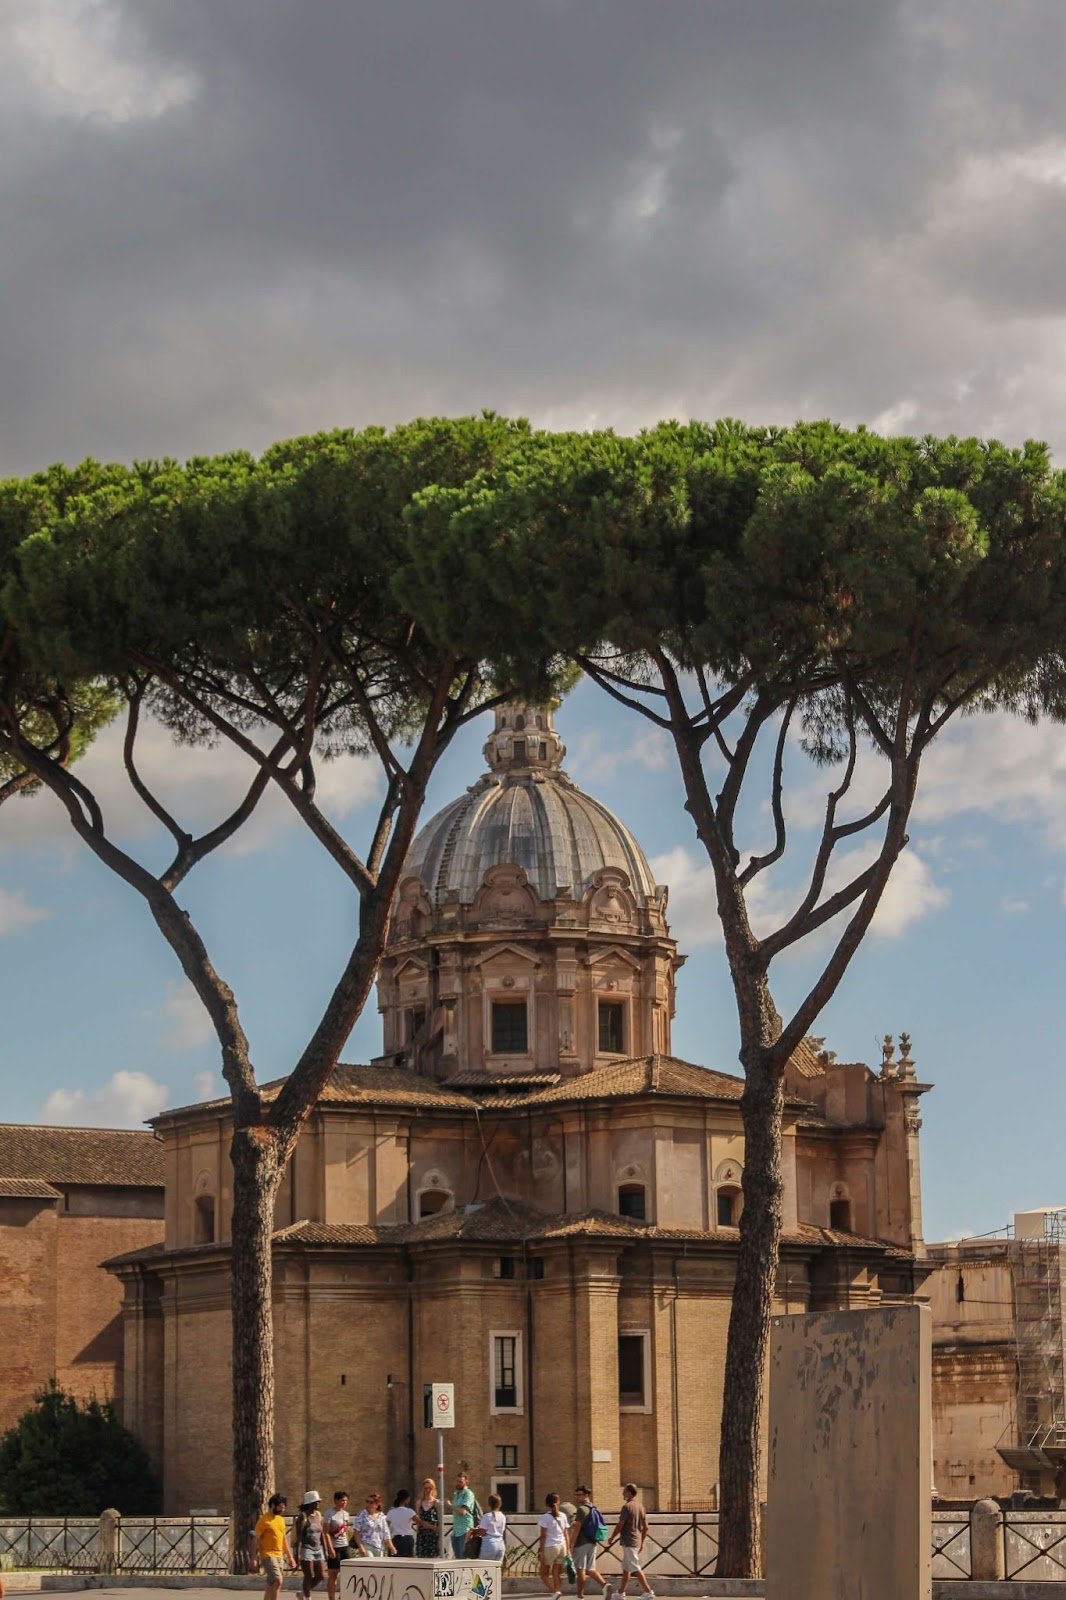 24 hours in Rome, Campidoglio Square was designed and planned by Michaelangelo, the Renaissance architect. There is a statue of Emperor Marcus Aurelius at the center of the square.